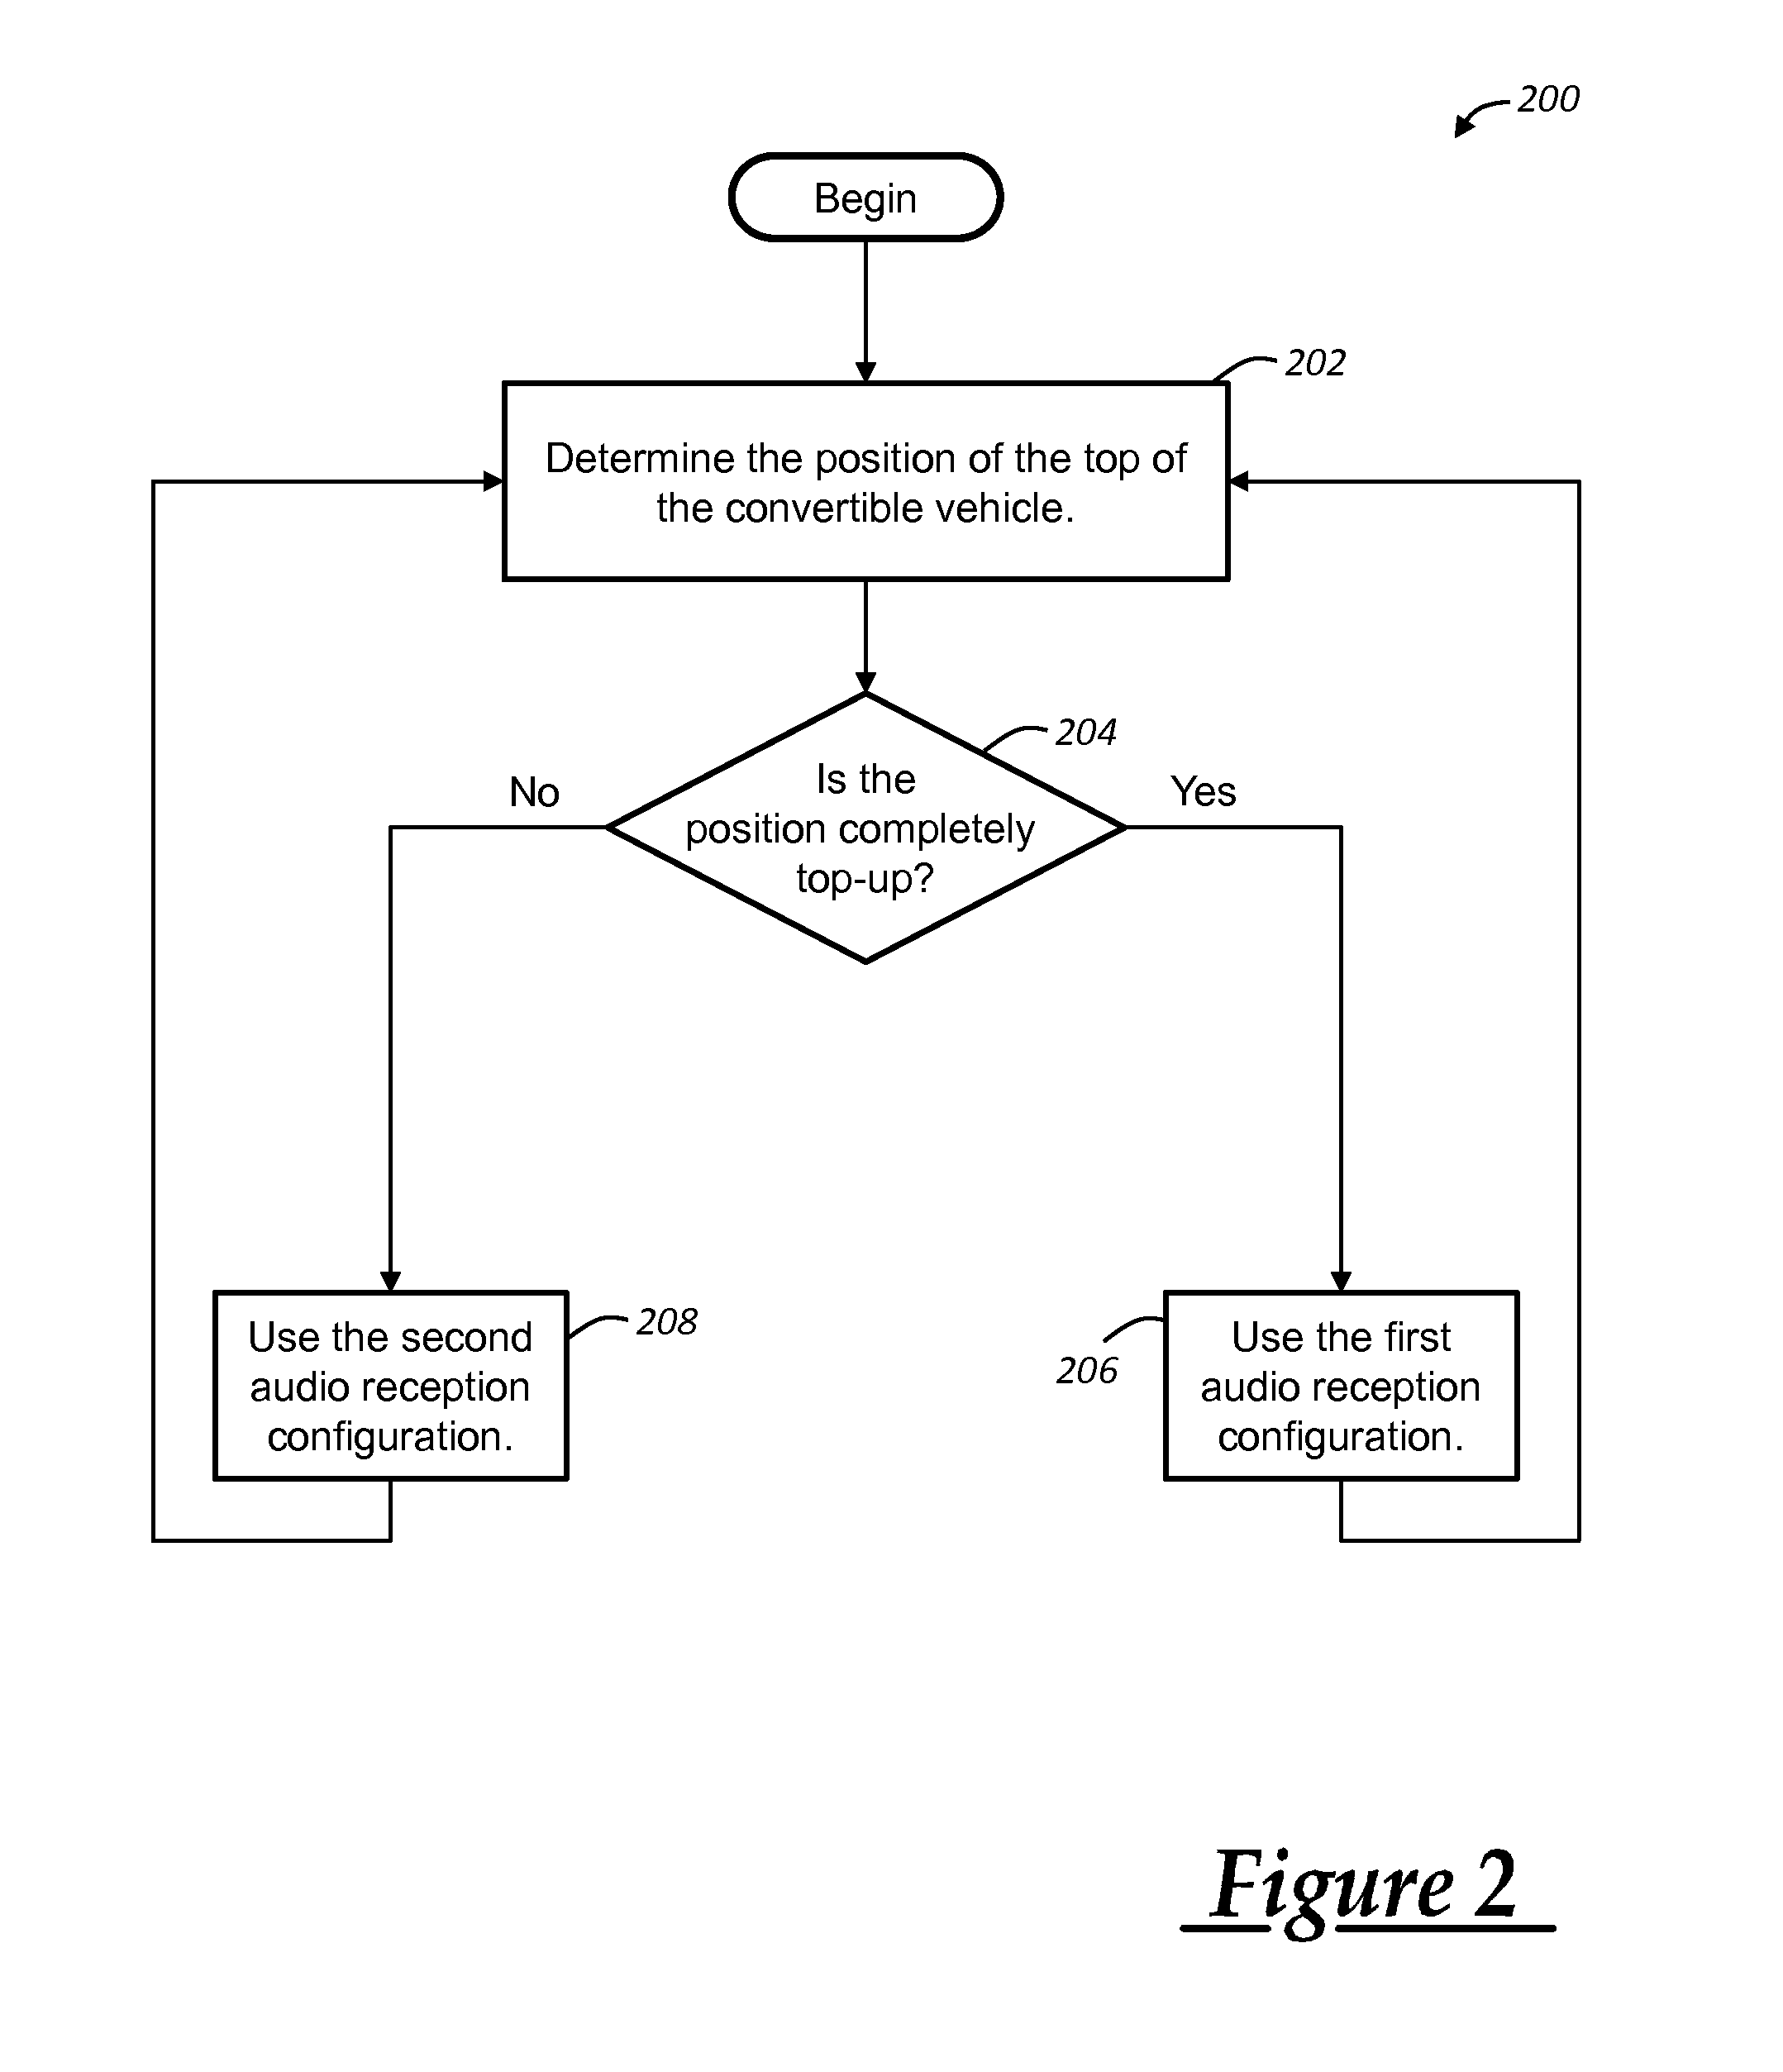 Switching between acoustic parameters in a convertible vehicle